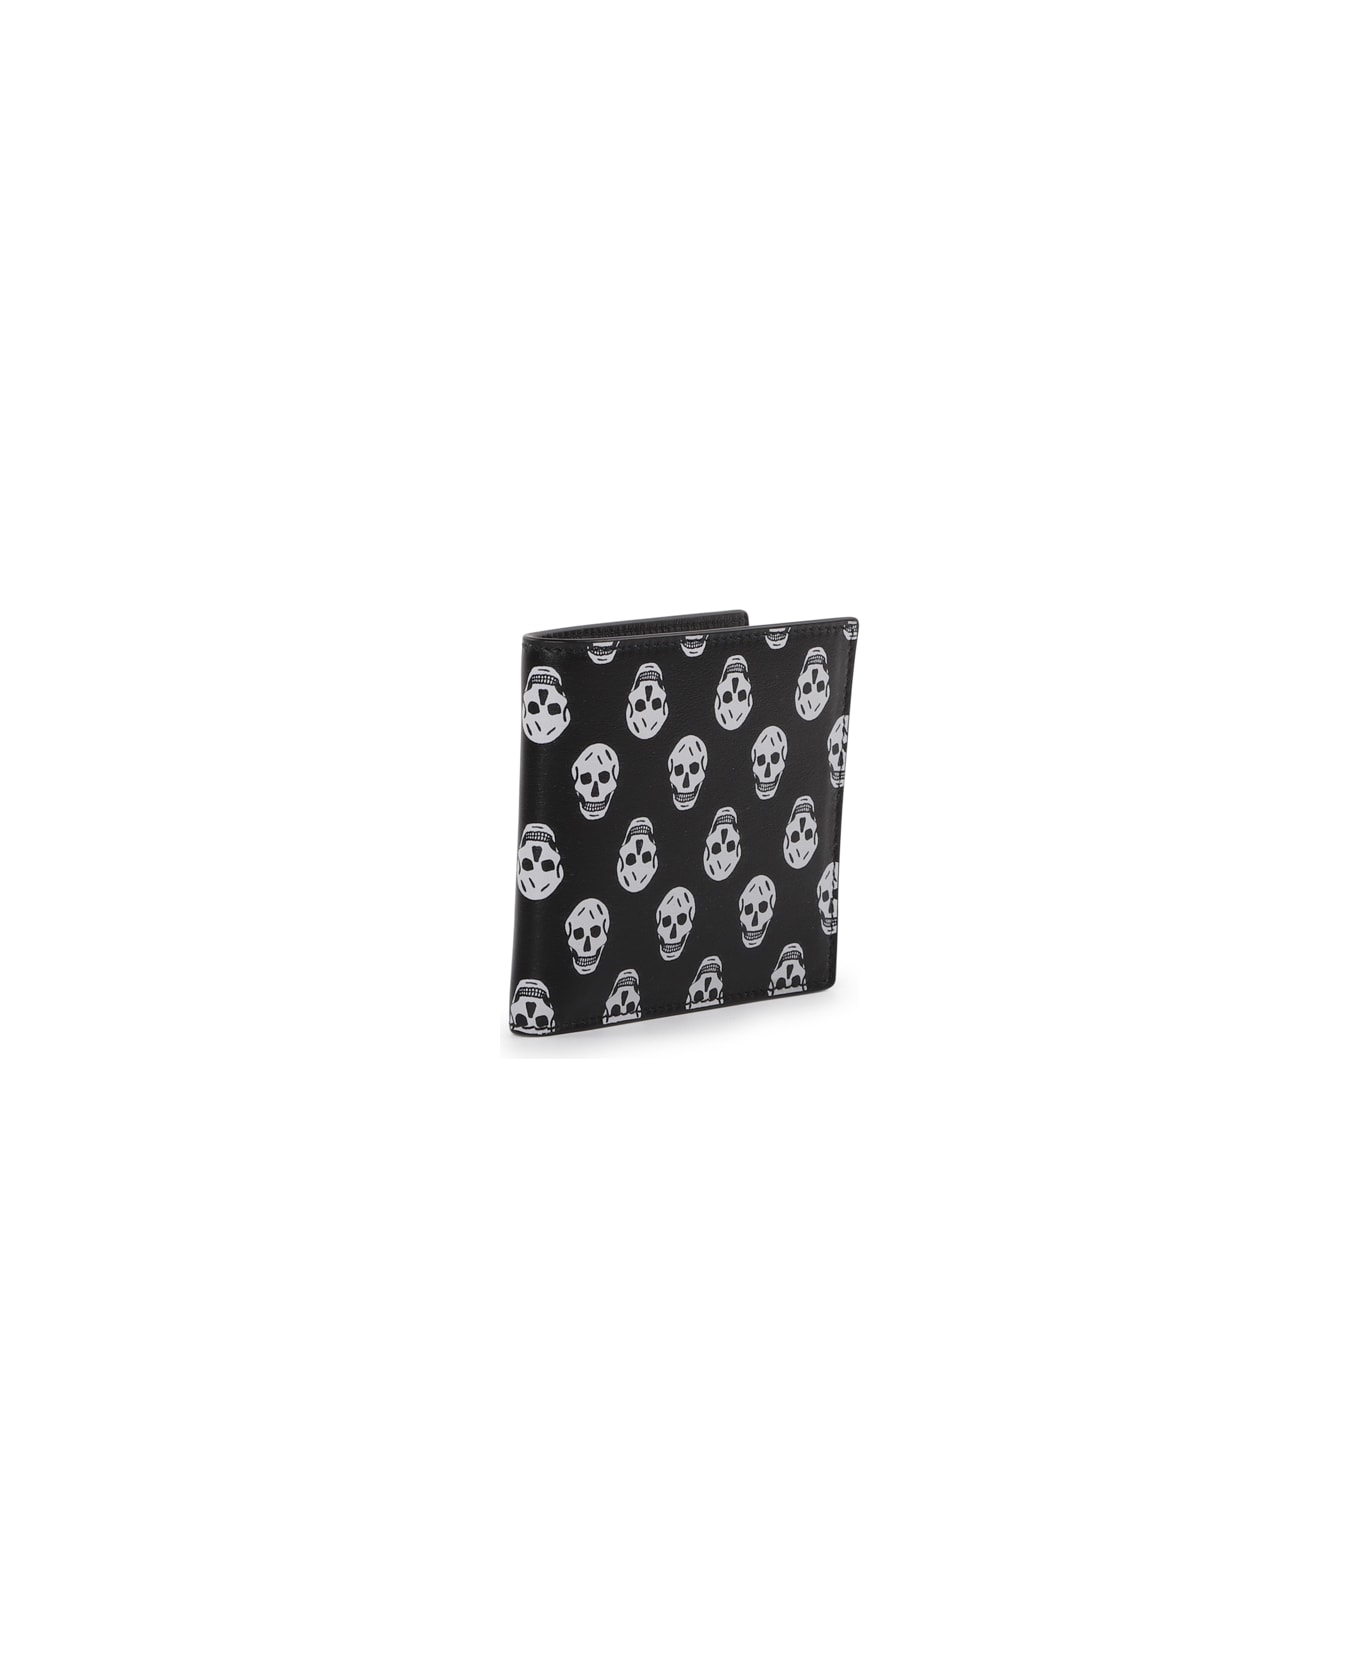 Alexander McQueen Leather Wallet With Skull Print - Black/white